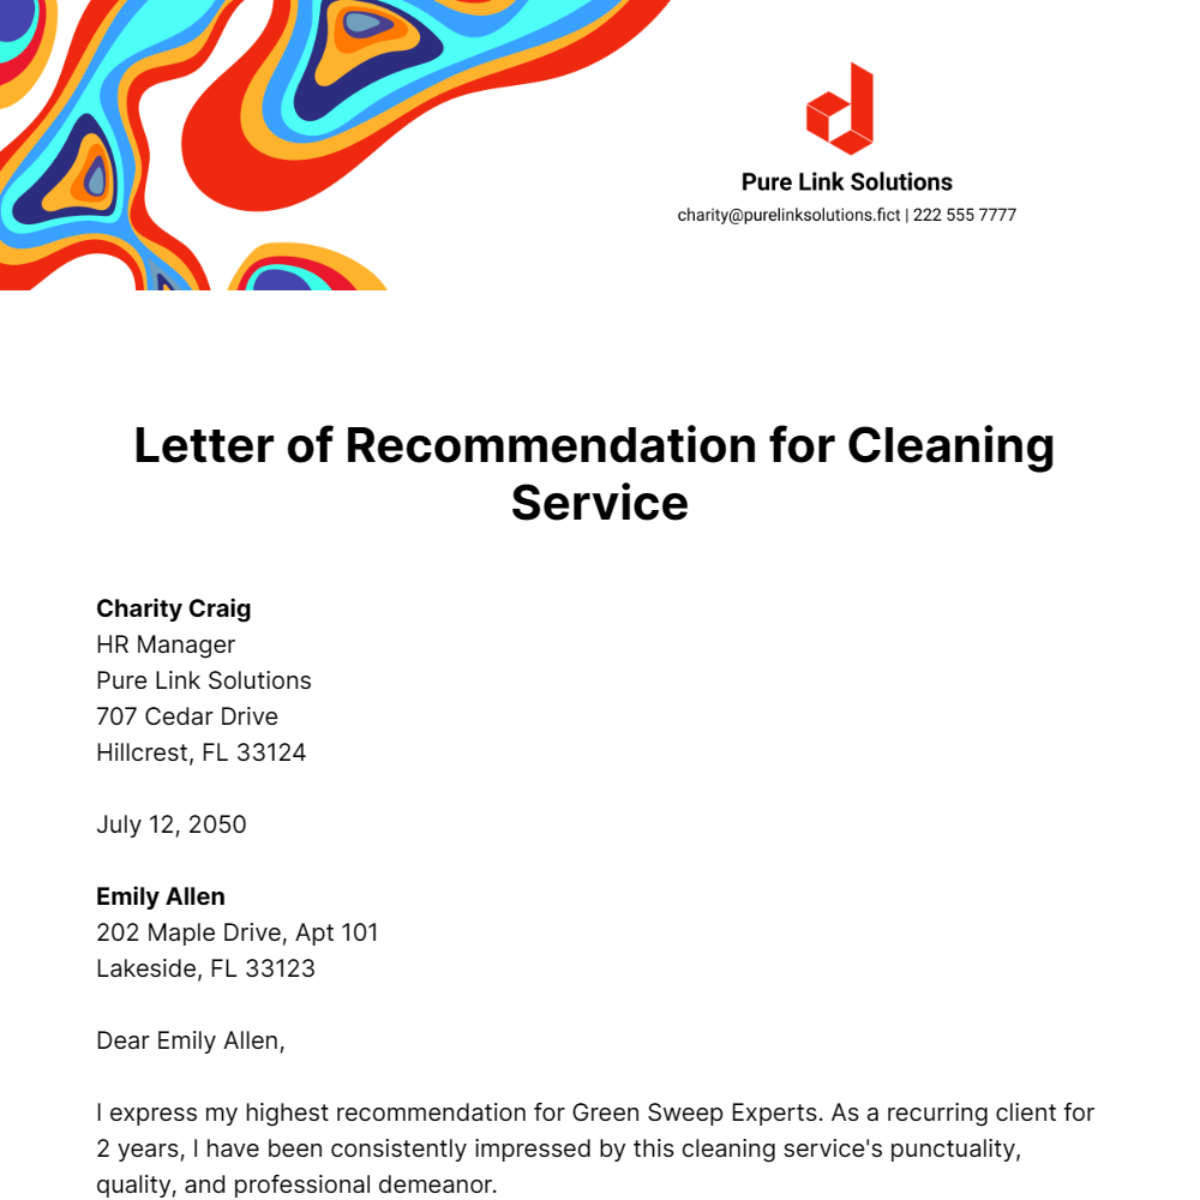 Letter of Recommendation for Cleaning Service Template